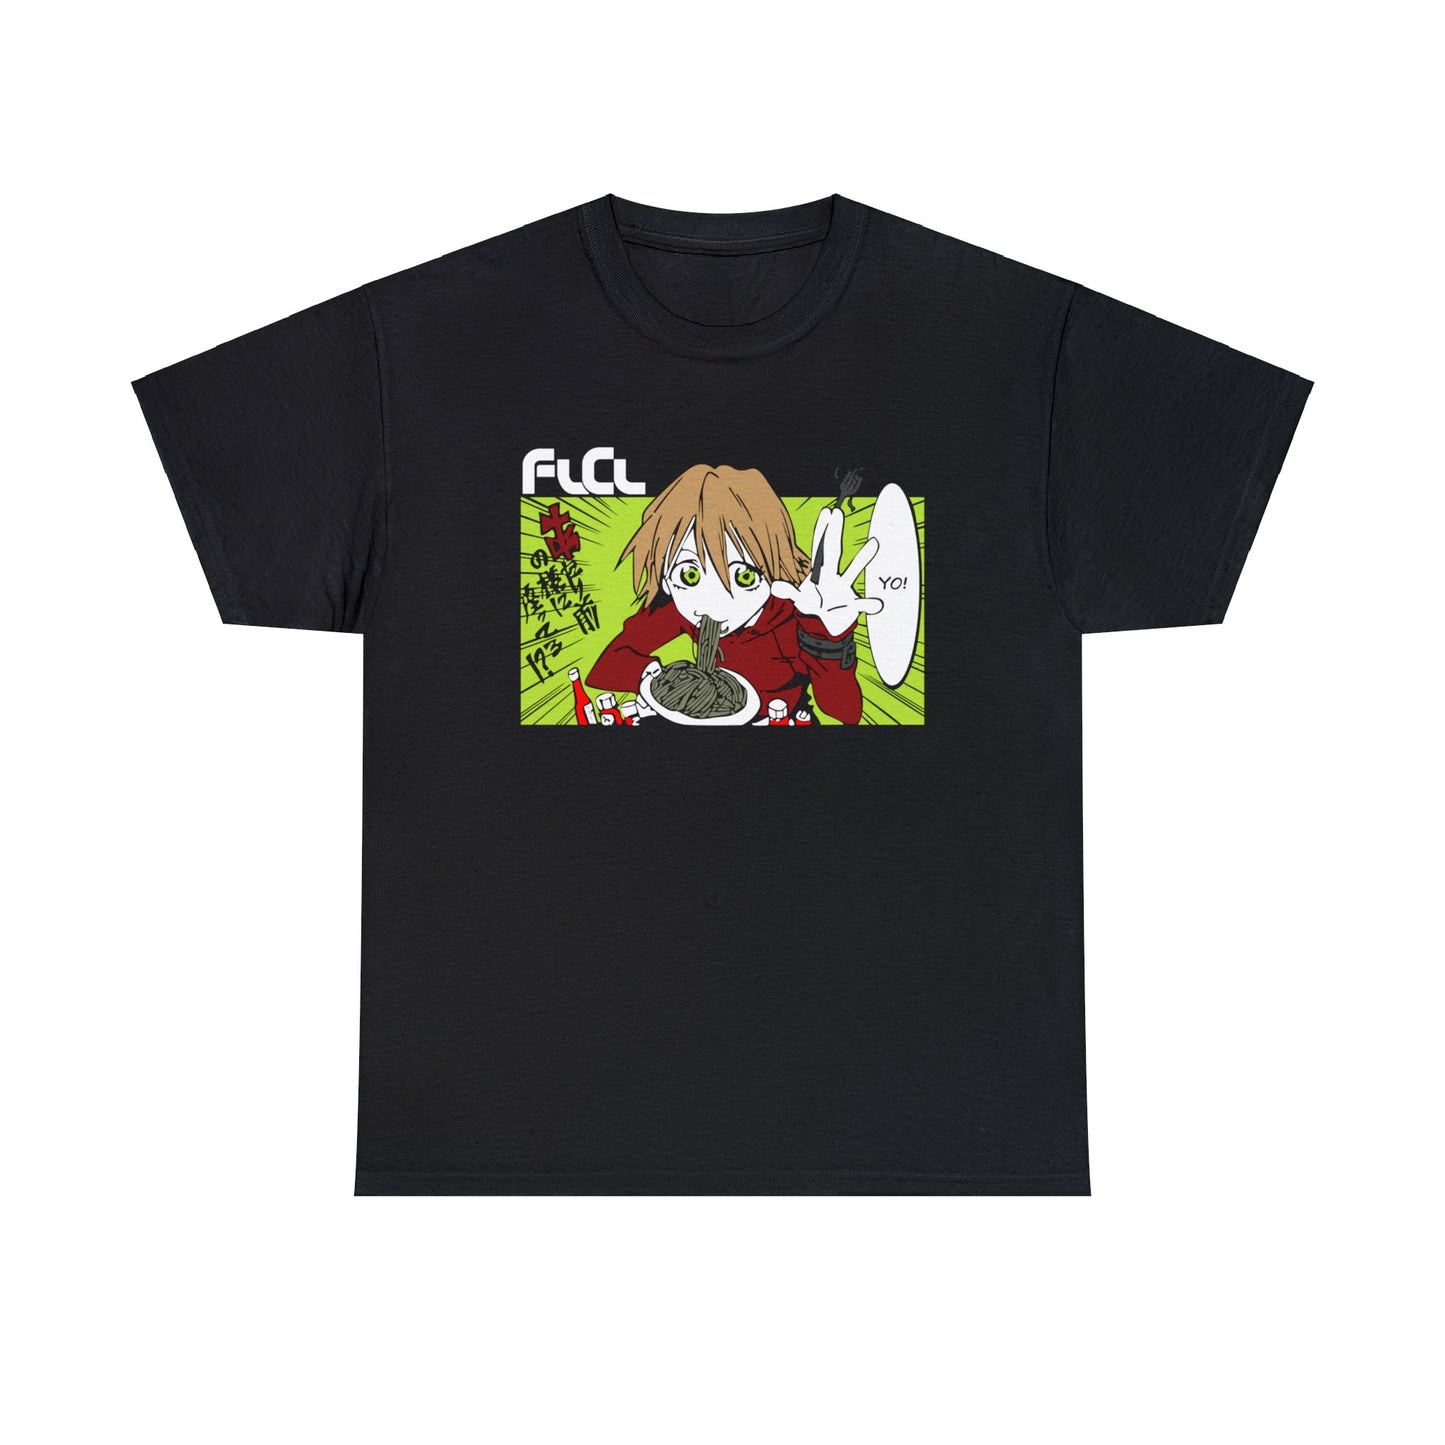 FLCL Fooly Cooly Anime Comics 1999 T-shirt for Sale